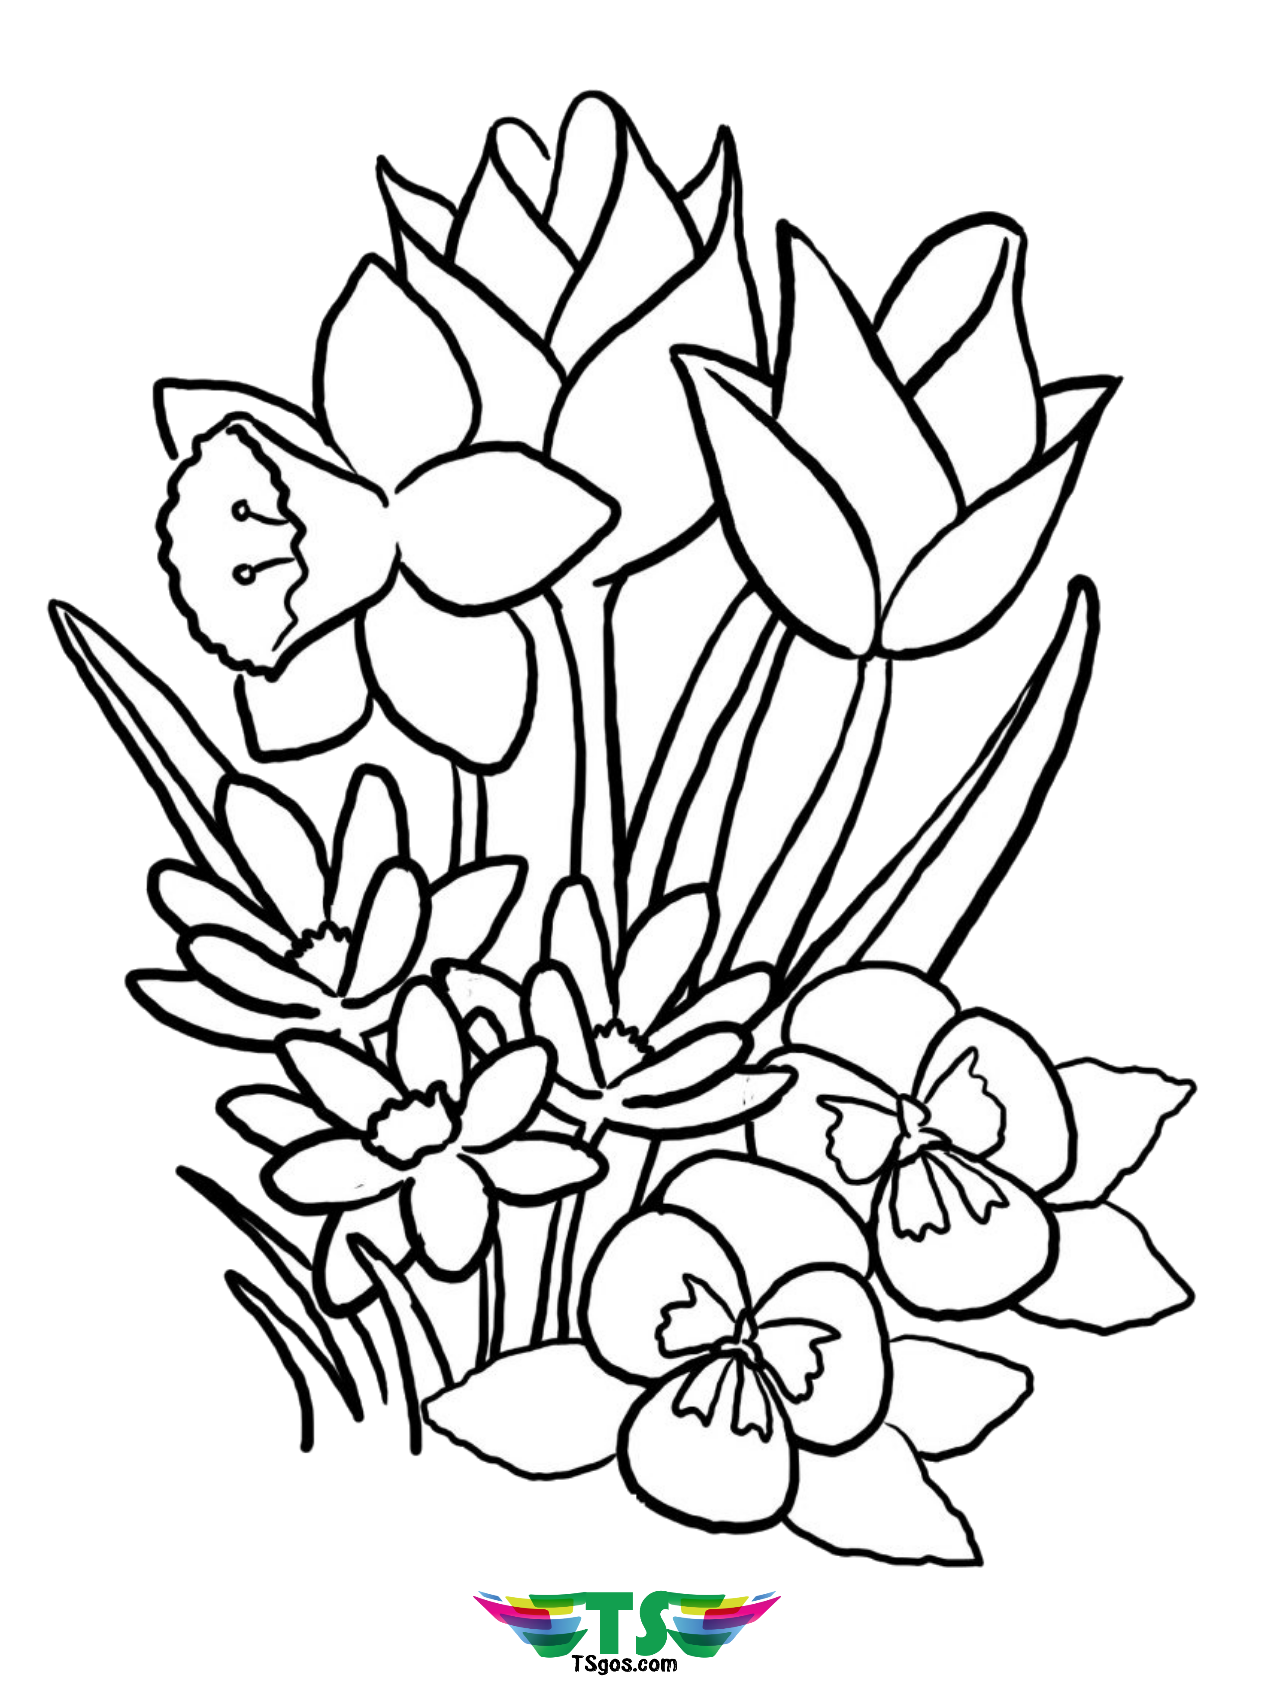 Free download to print beautiful spring flower coloring pages pictures